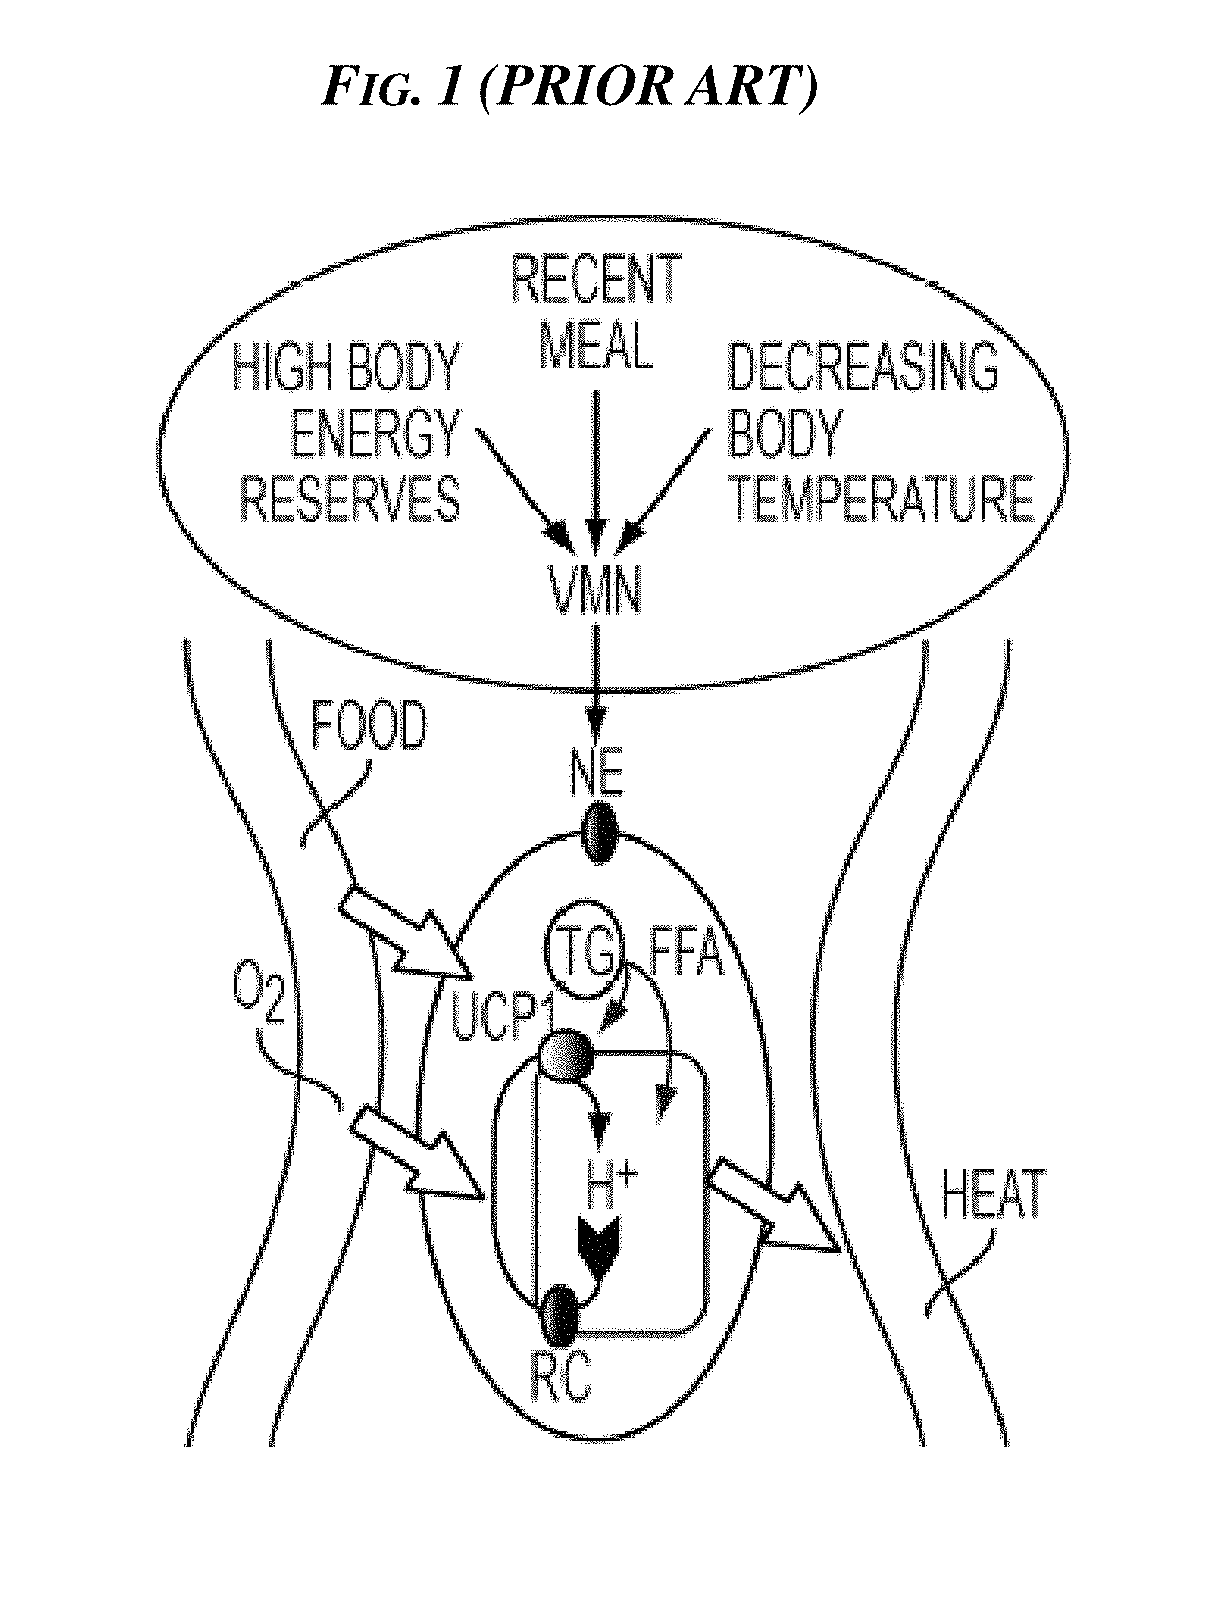 Methods and devices for activating brown adipose tissue using electrical energy